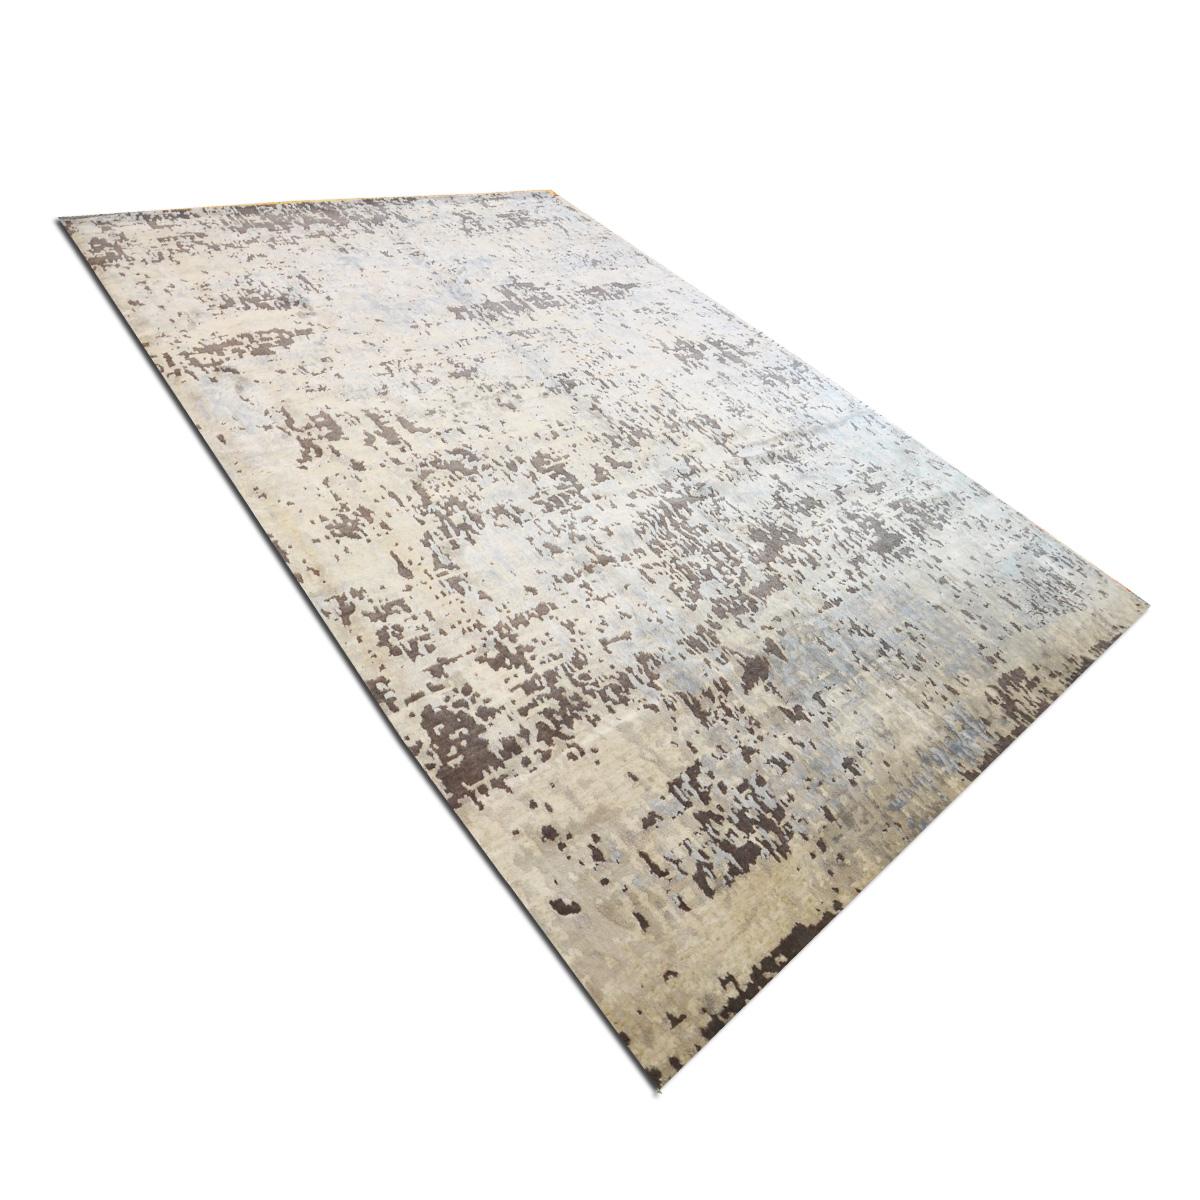 Contemporary rug belonging to the abstract collection. Measurements: 4,00 x 3,00 m.
- Handmade in silk and wool in the artisan workshops that the Zigler firm has in India.
- Colors are not uniform, so this type of rugs are very functional when